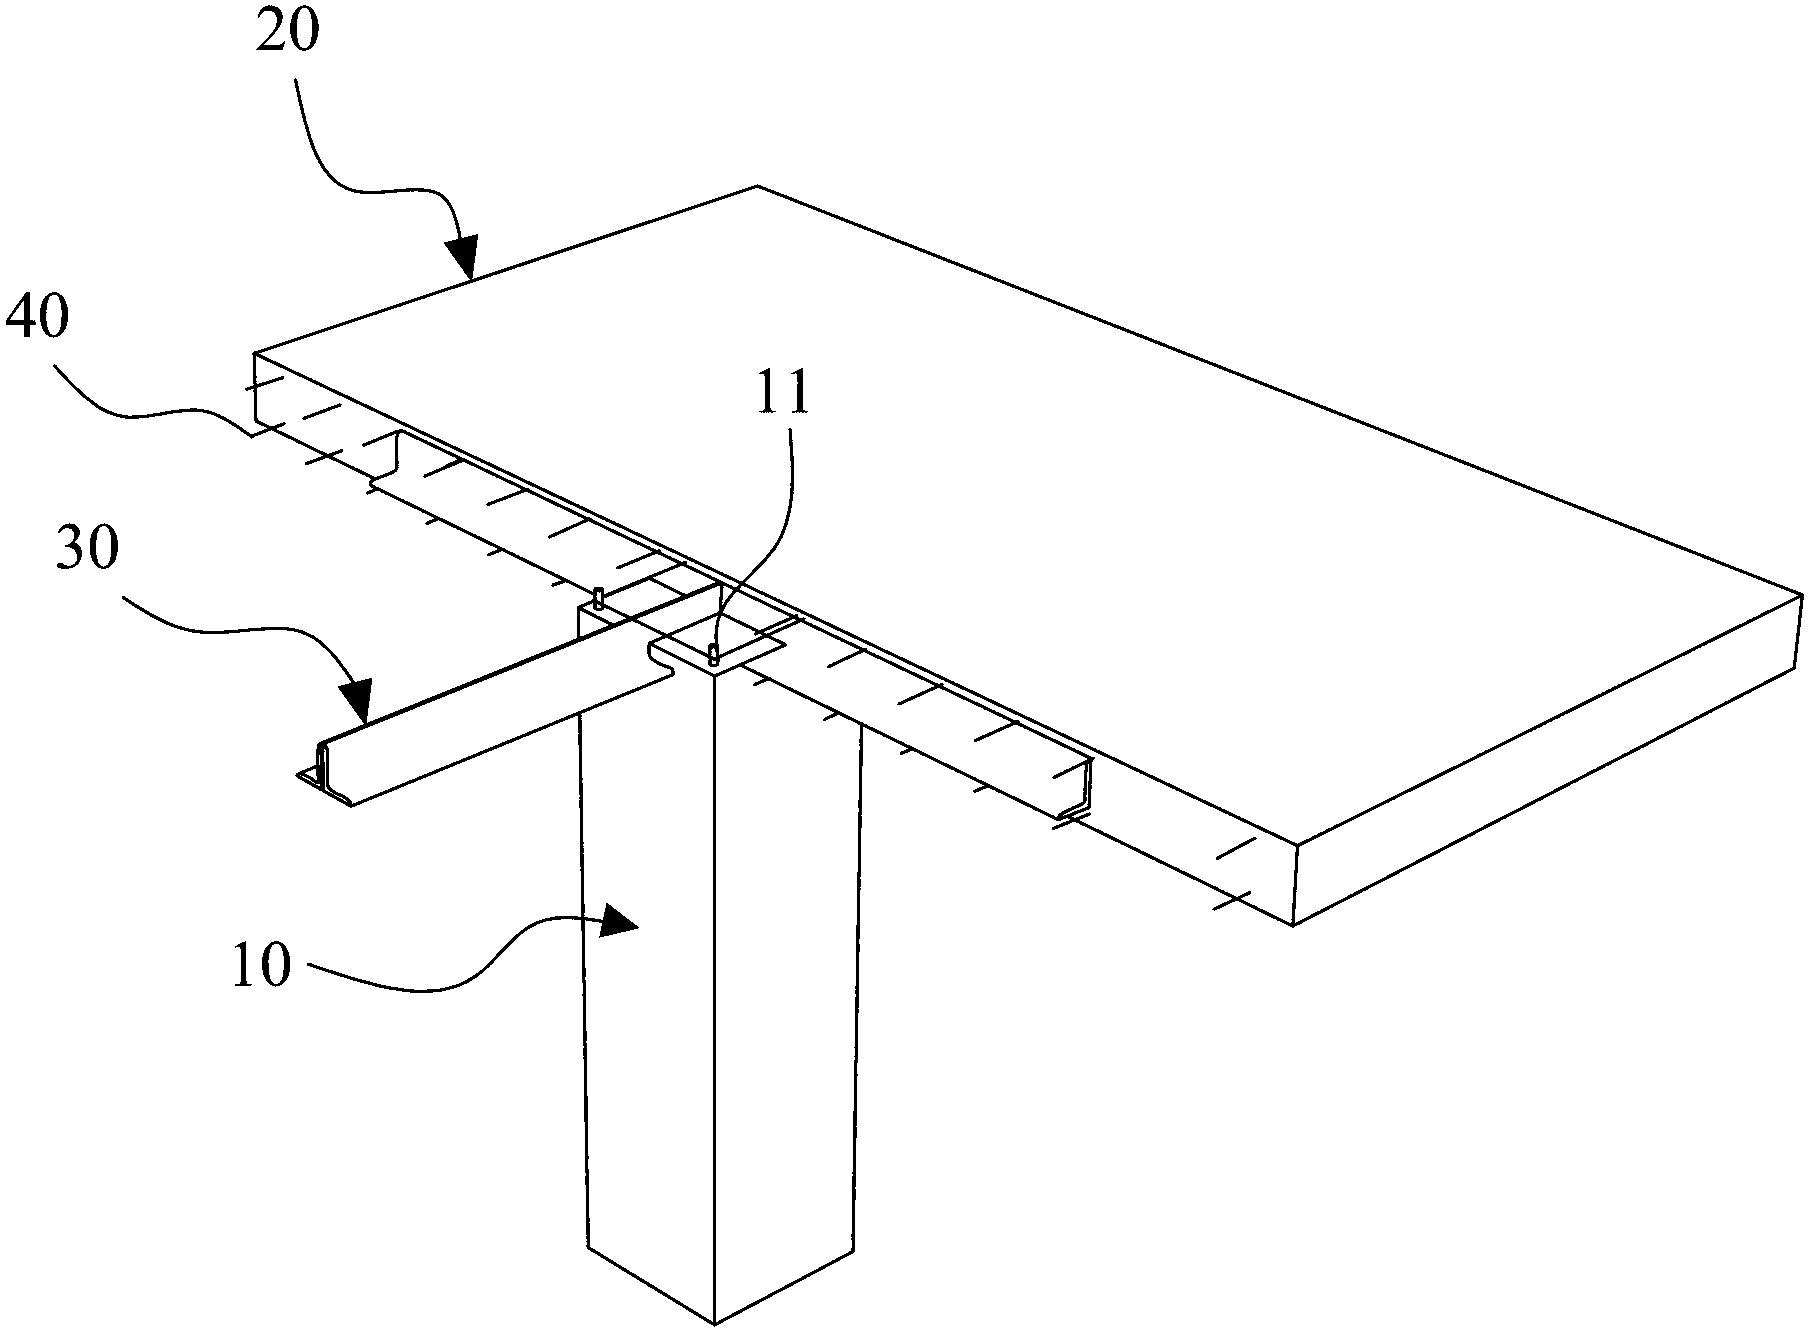 Crossed double angle reinforced flat slab structure